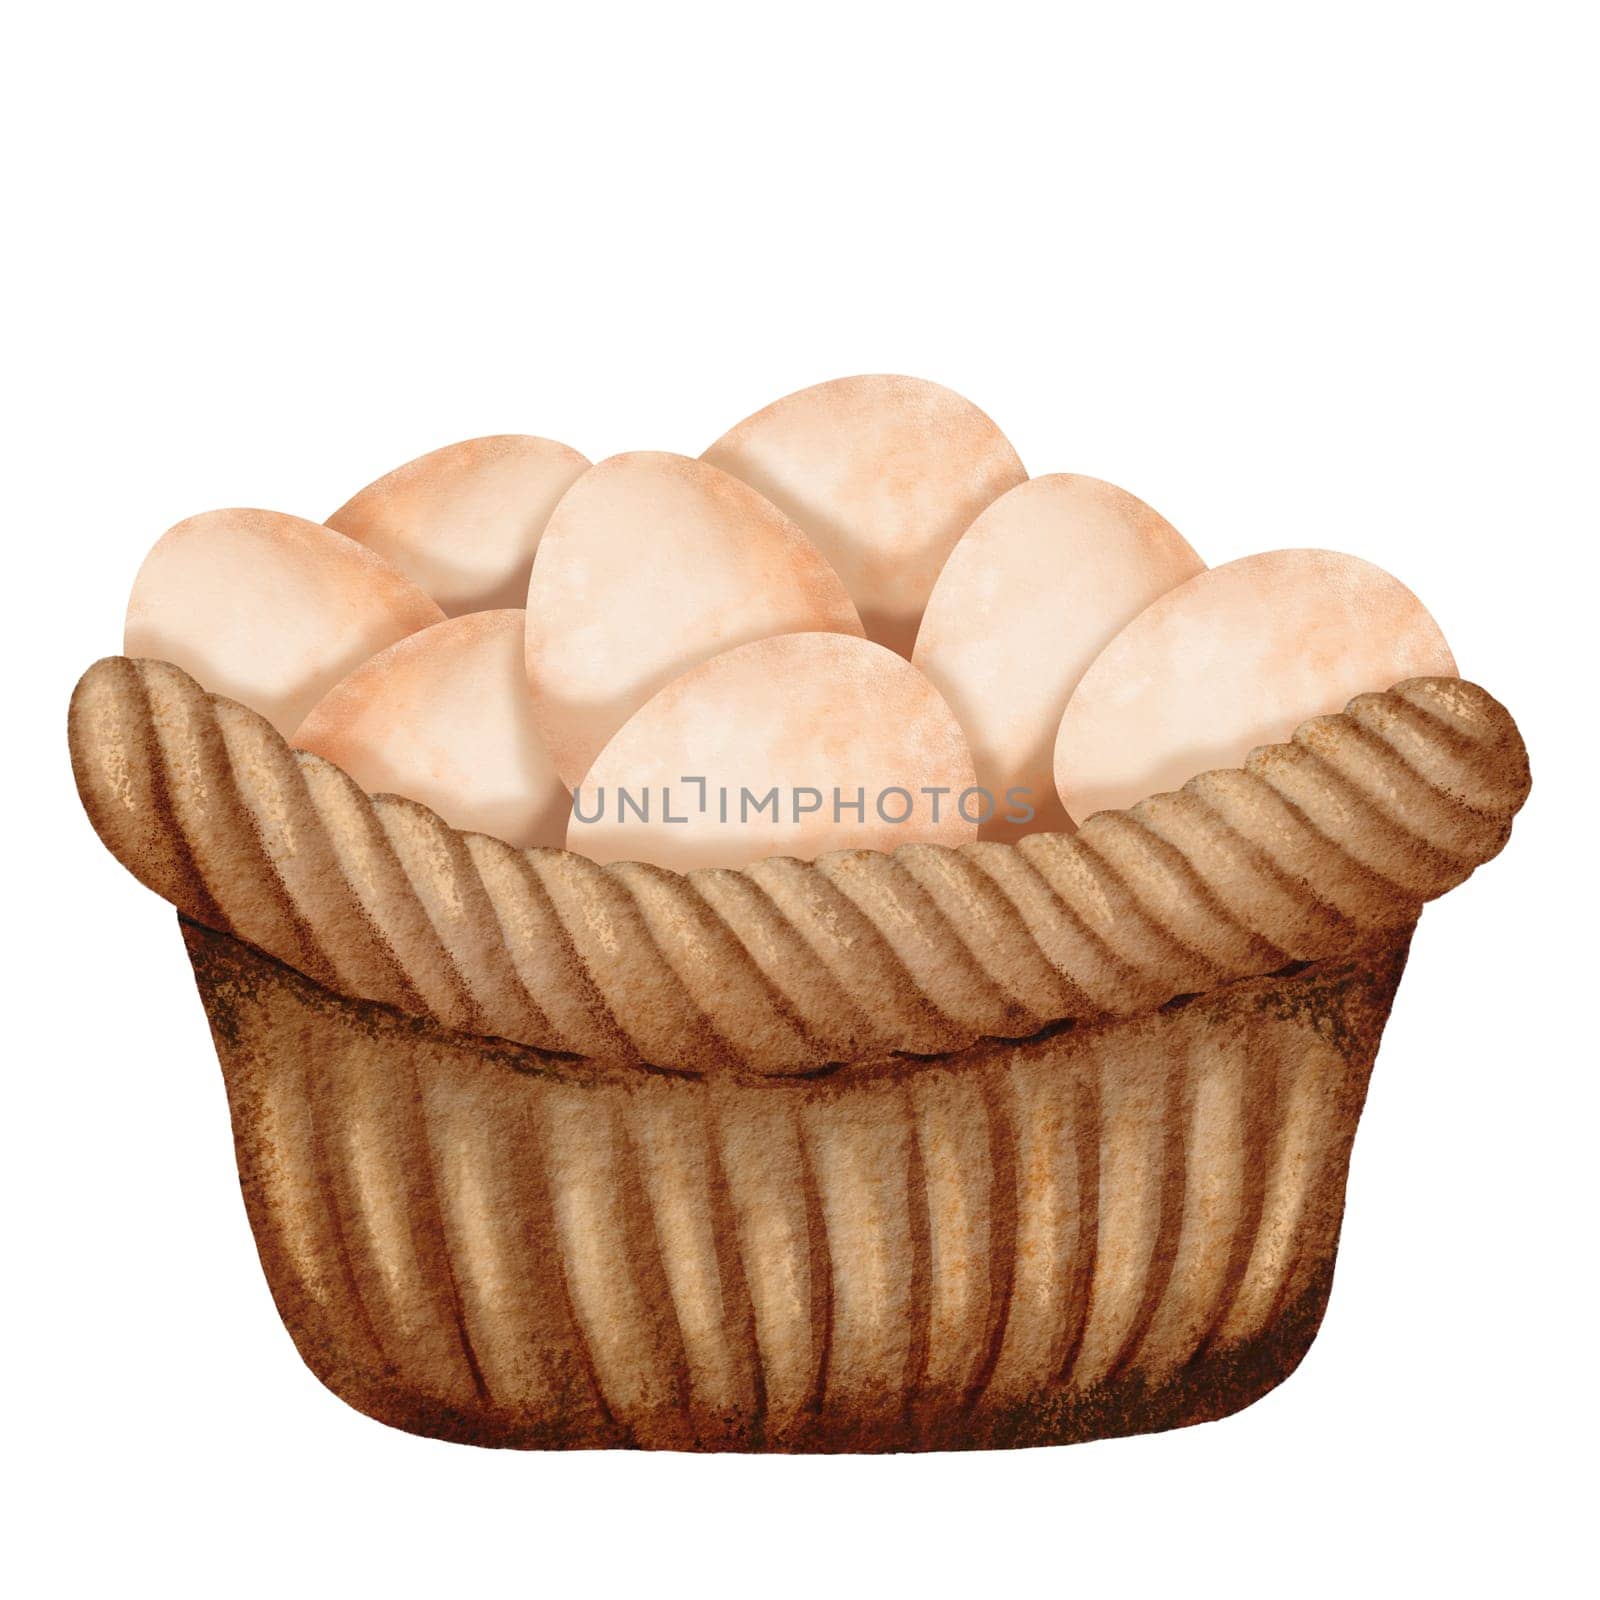 Watercolor illustration of a brown woven basket filled with fresh eggs. Captures the rustic charm of a simple, country-inspired scene. Perfect for conveying a wholesome, farm-fresh atmosphere by Art_Mari_Ka